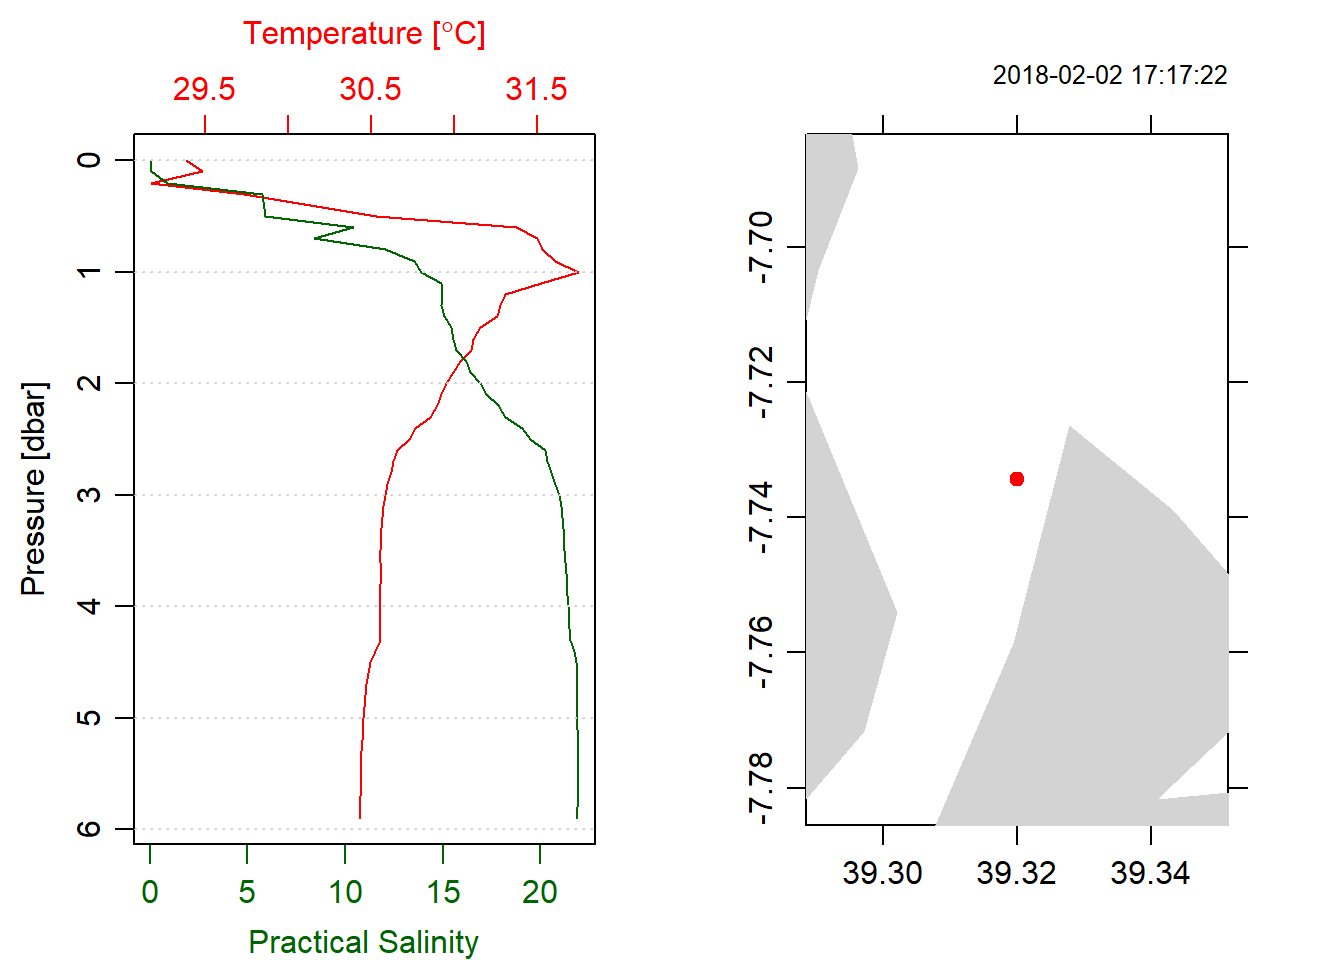 Profiles of temperature and salinity at station 1